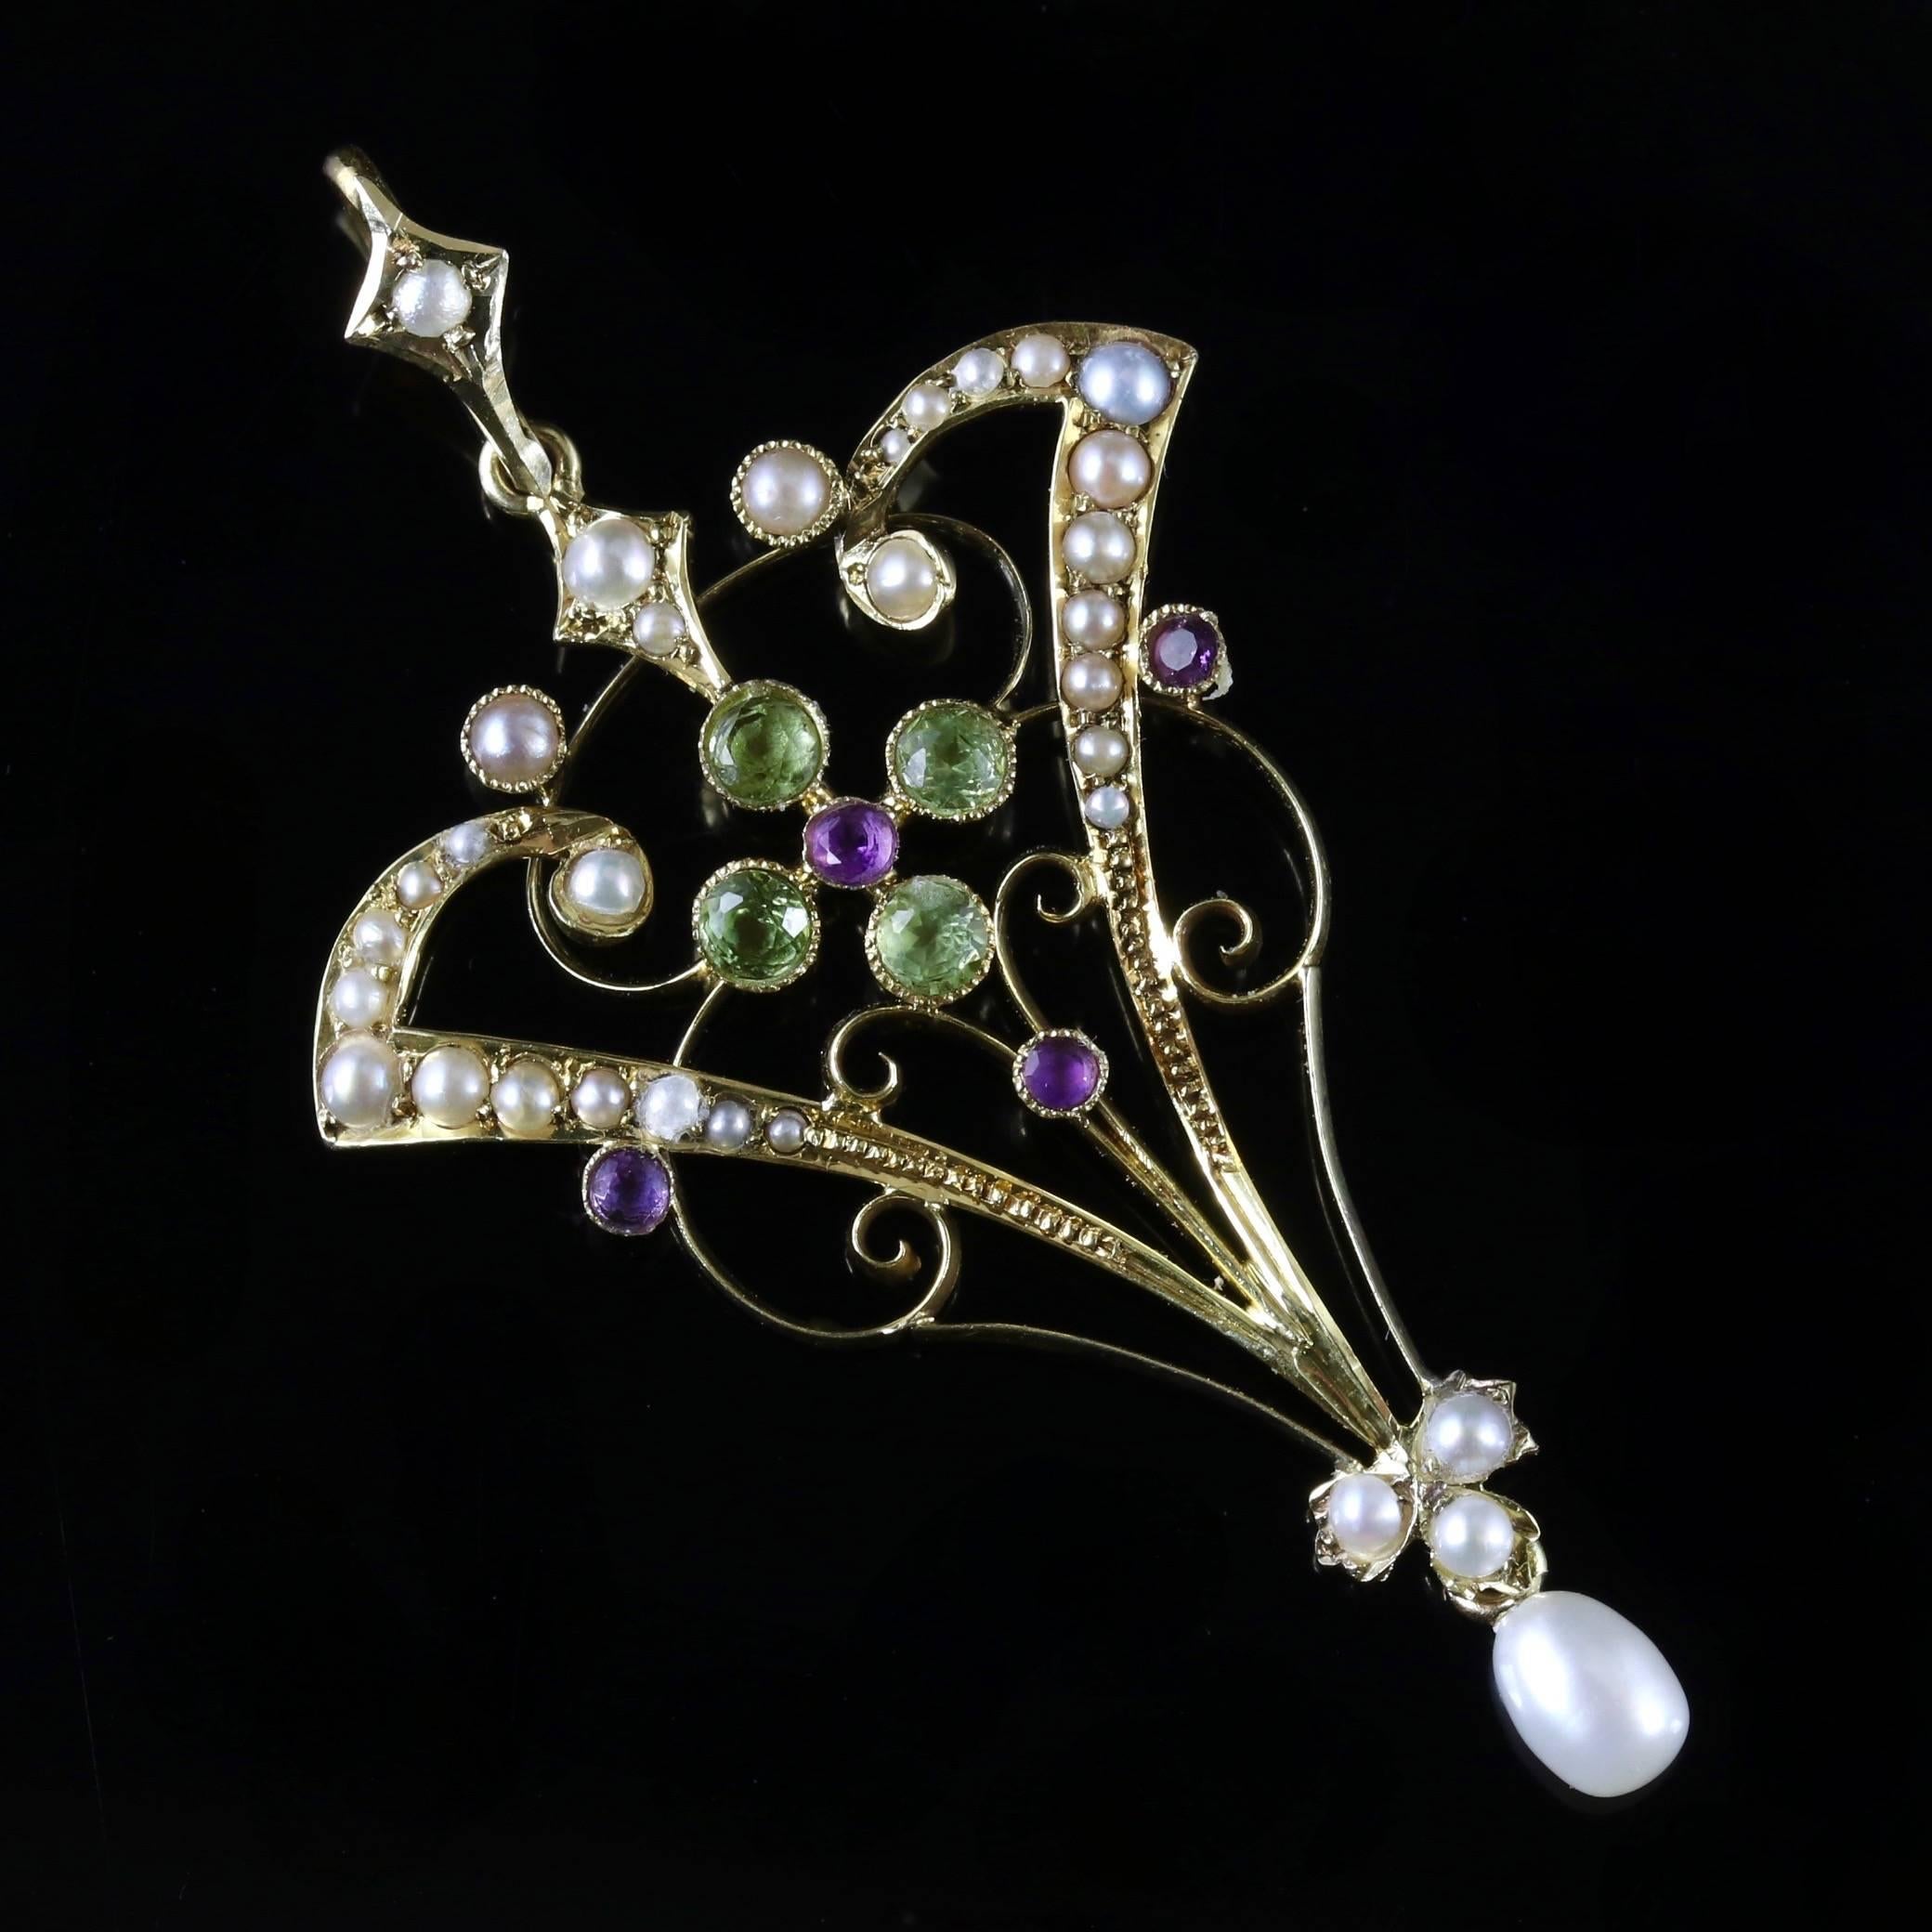 This Victorian 15ct Yellow Gold Suffragette pendant is beautiful, Circa 1900. 

The pendant is adorned with a 4 green Peridots that surround the Amethyst in the centre. The Pearls are decorated all round the pendant in a floral style gallery, which